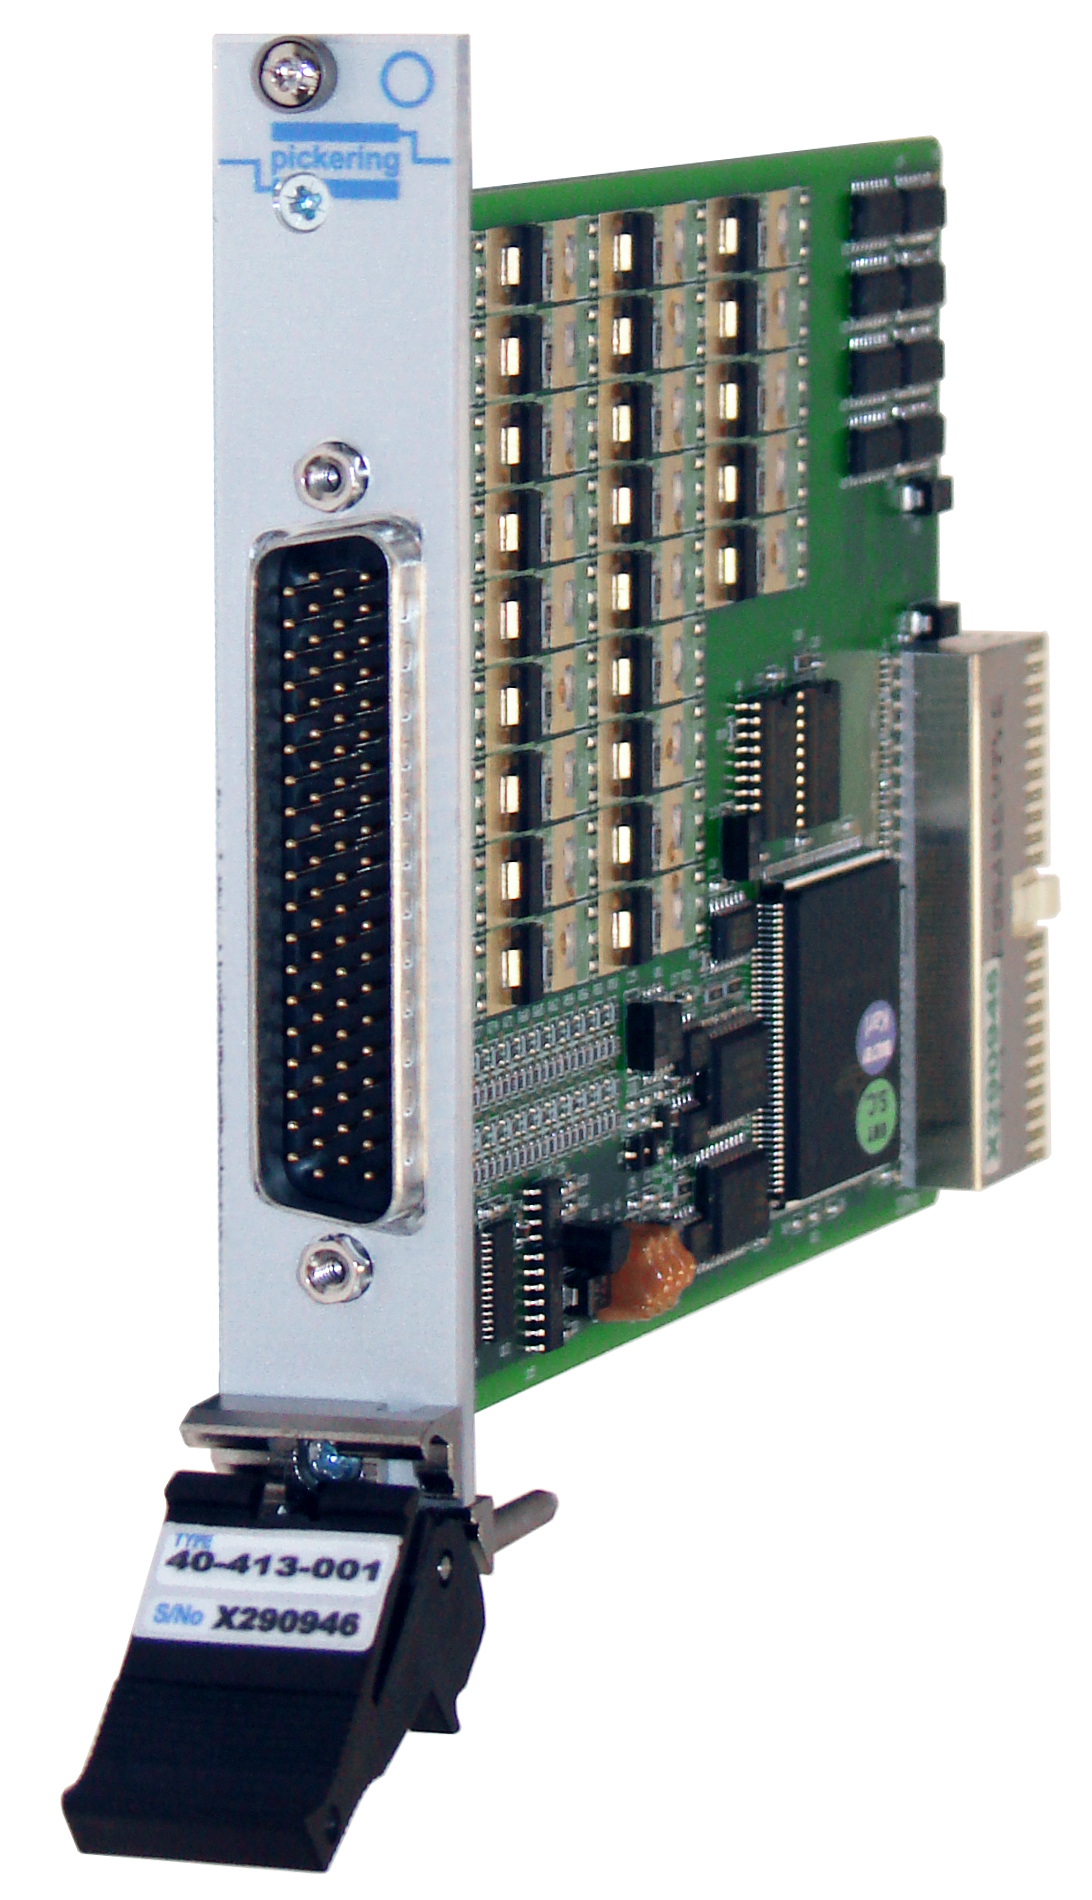 Front panel of PXI card 40-413-001